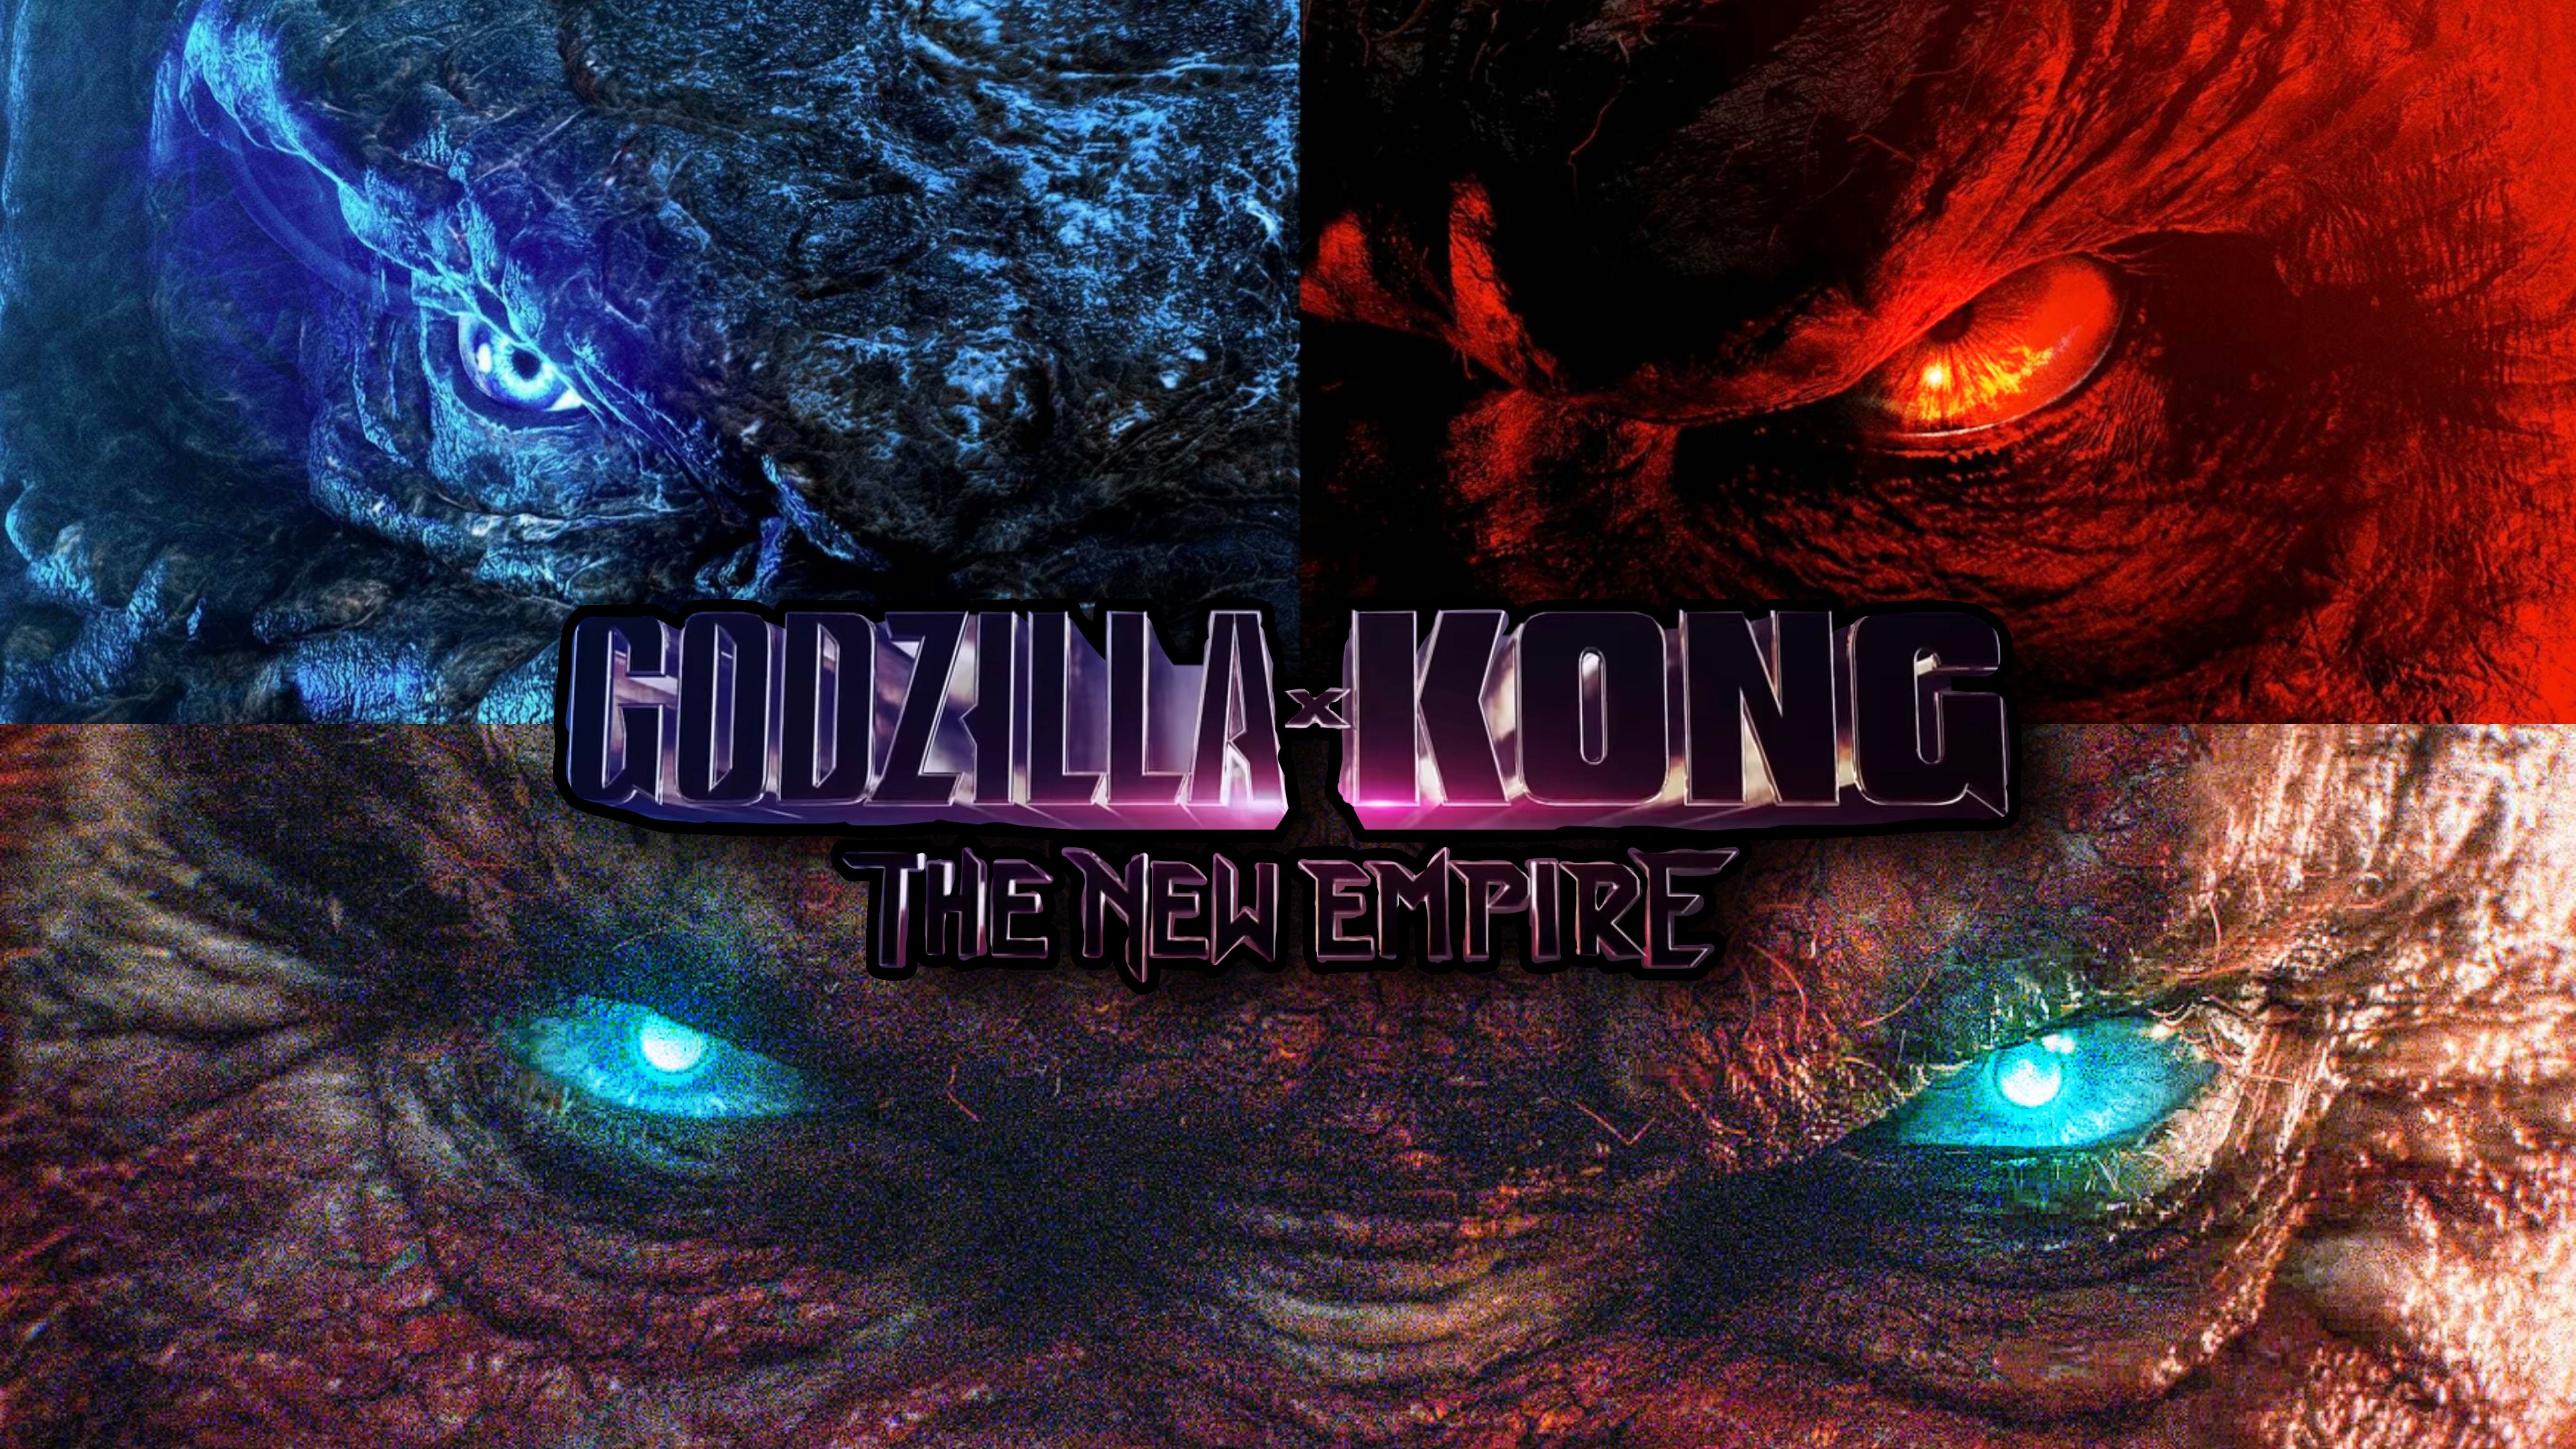 Godzilla x Kong: The New Empire wallpaper Resolution 4096x2304 | Best Download this awesome wallpaper - Cool Wallpaper HD - CoolWallpaper-HD.com